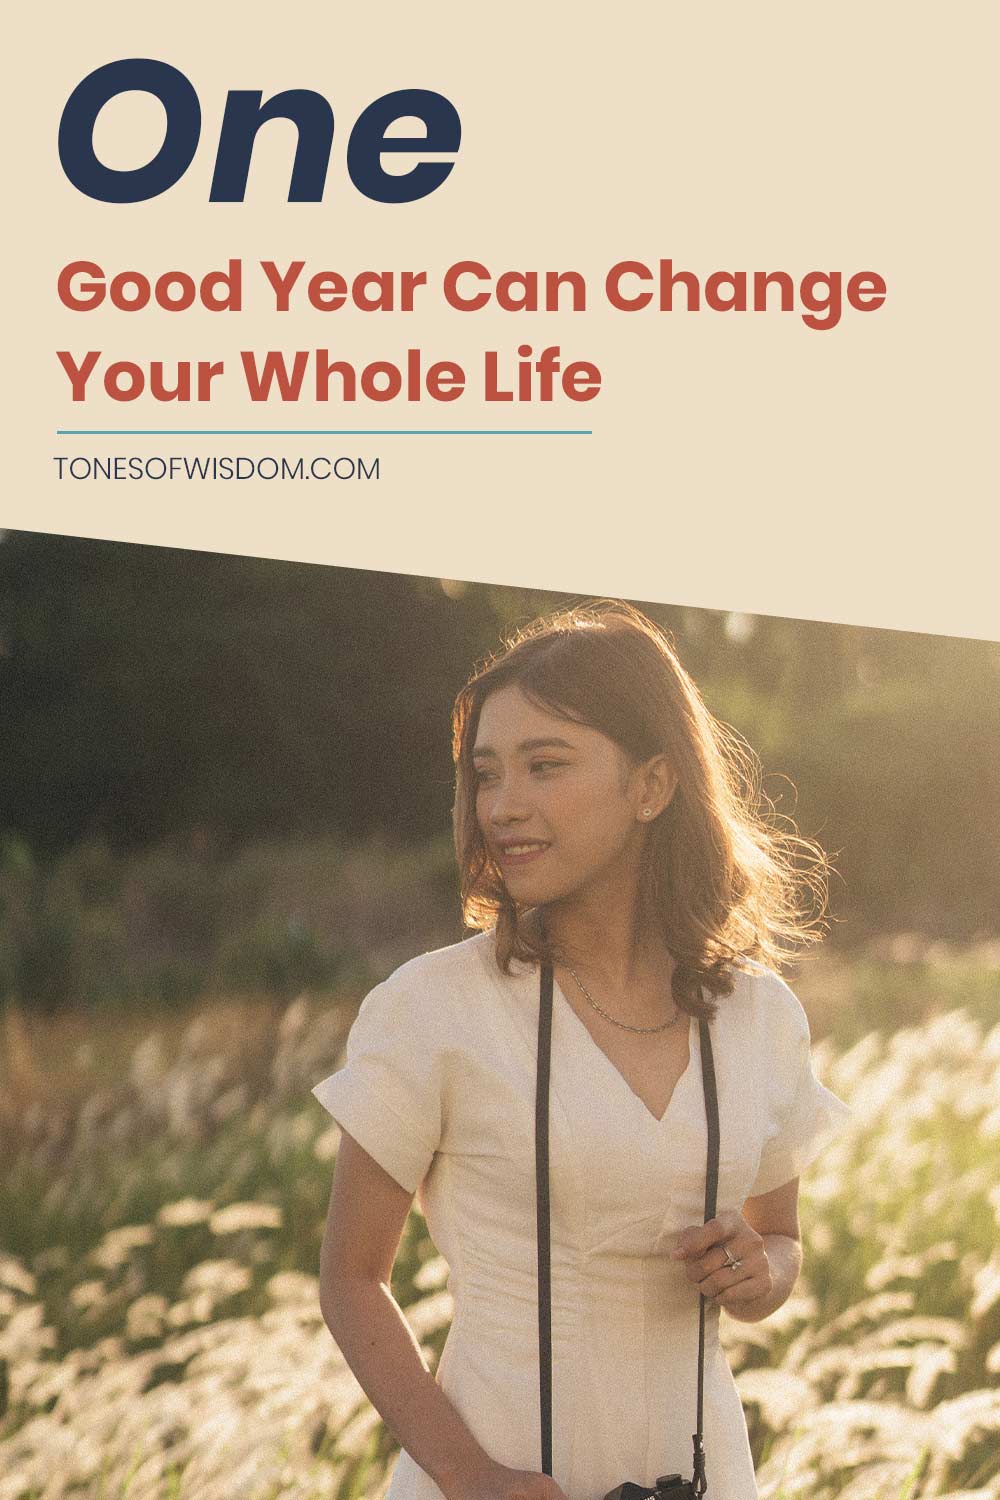 One Good Year Can Change Your Whole Life